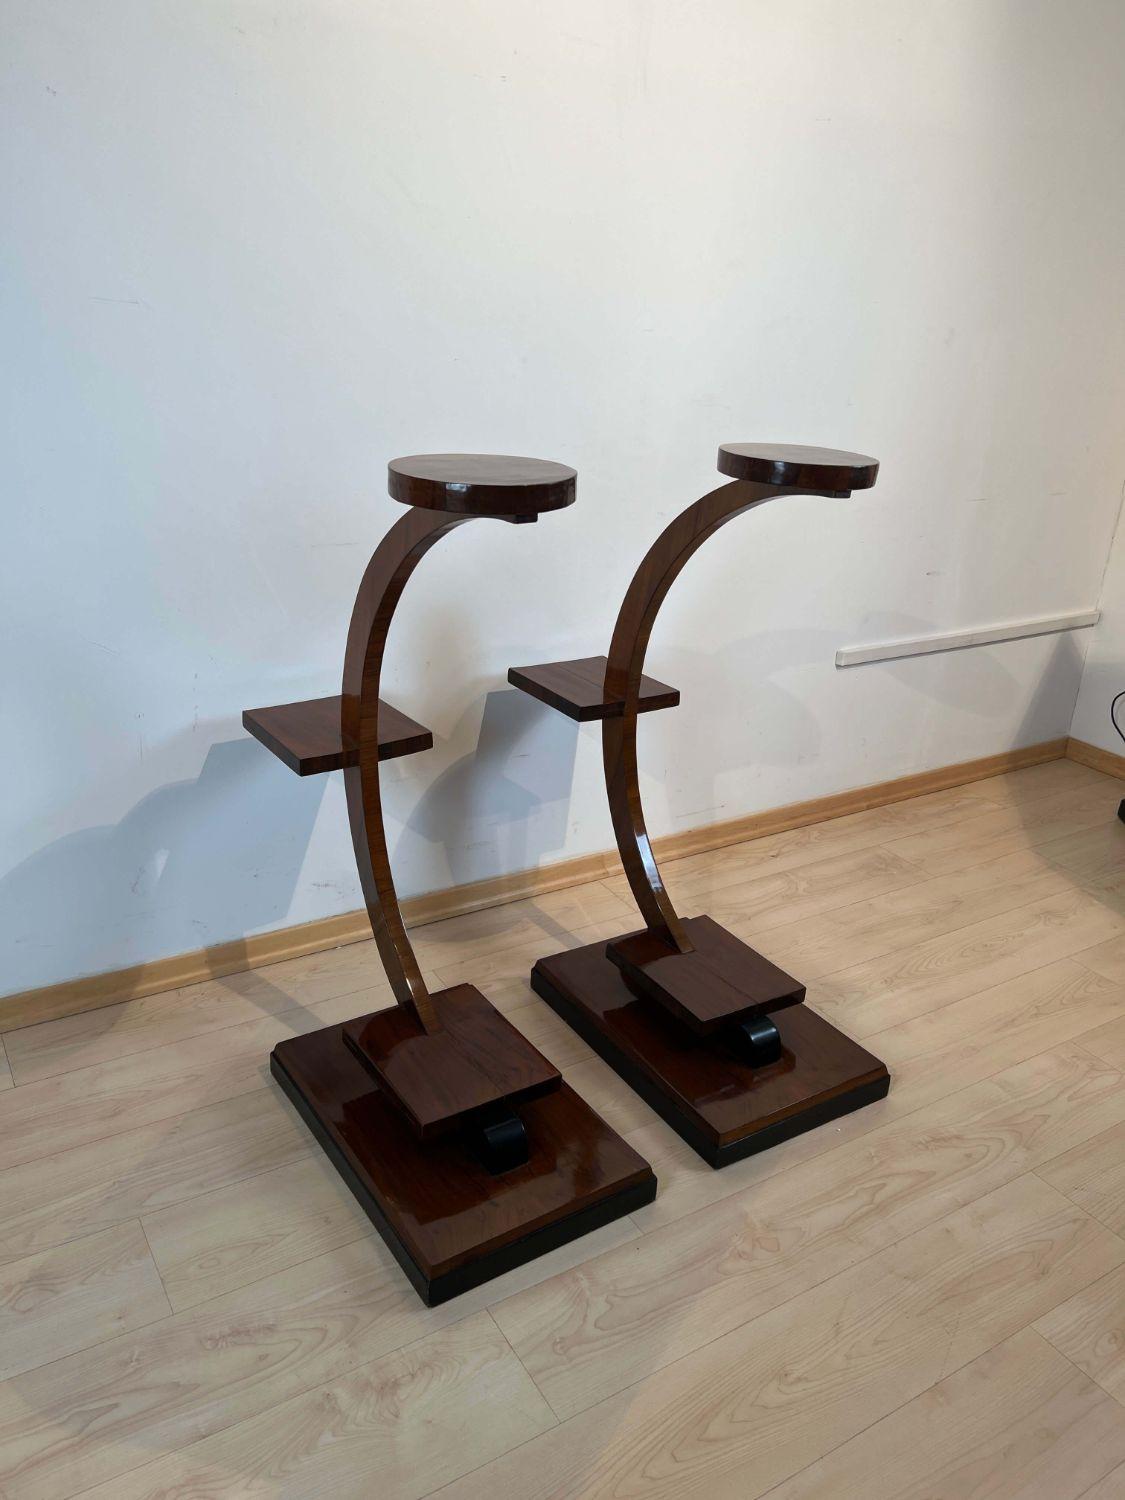 French Pair of Art Deco Flower Stands or Side Tables, Walnut Veneer, France, circa 1925